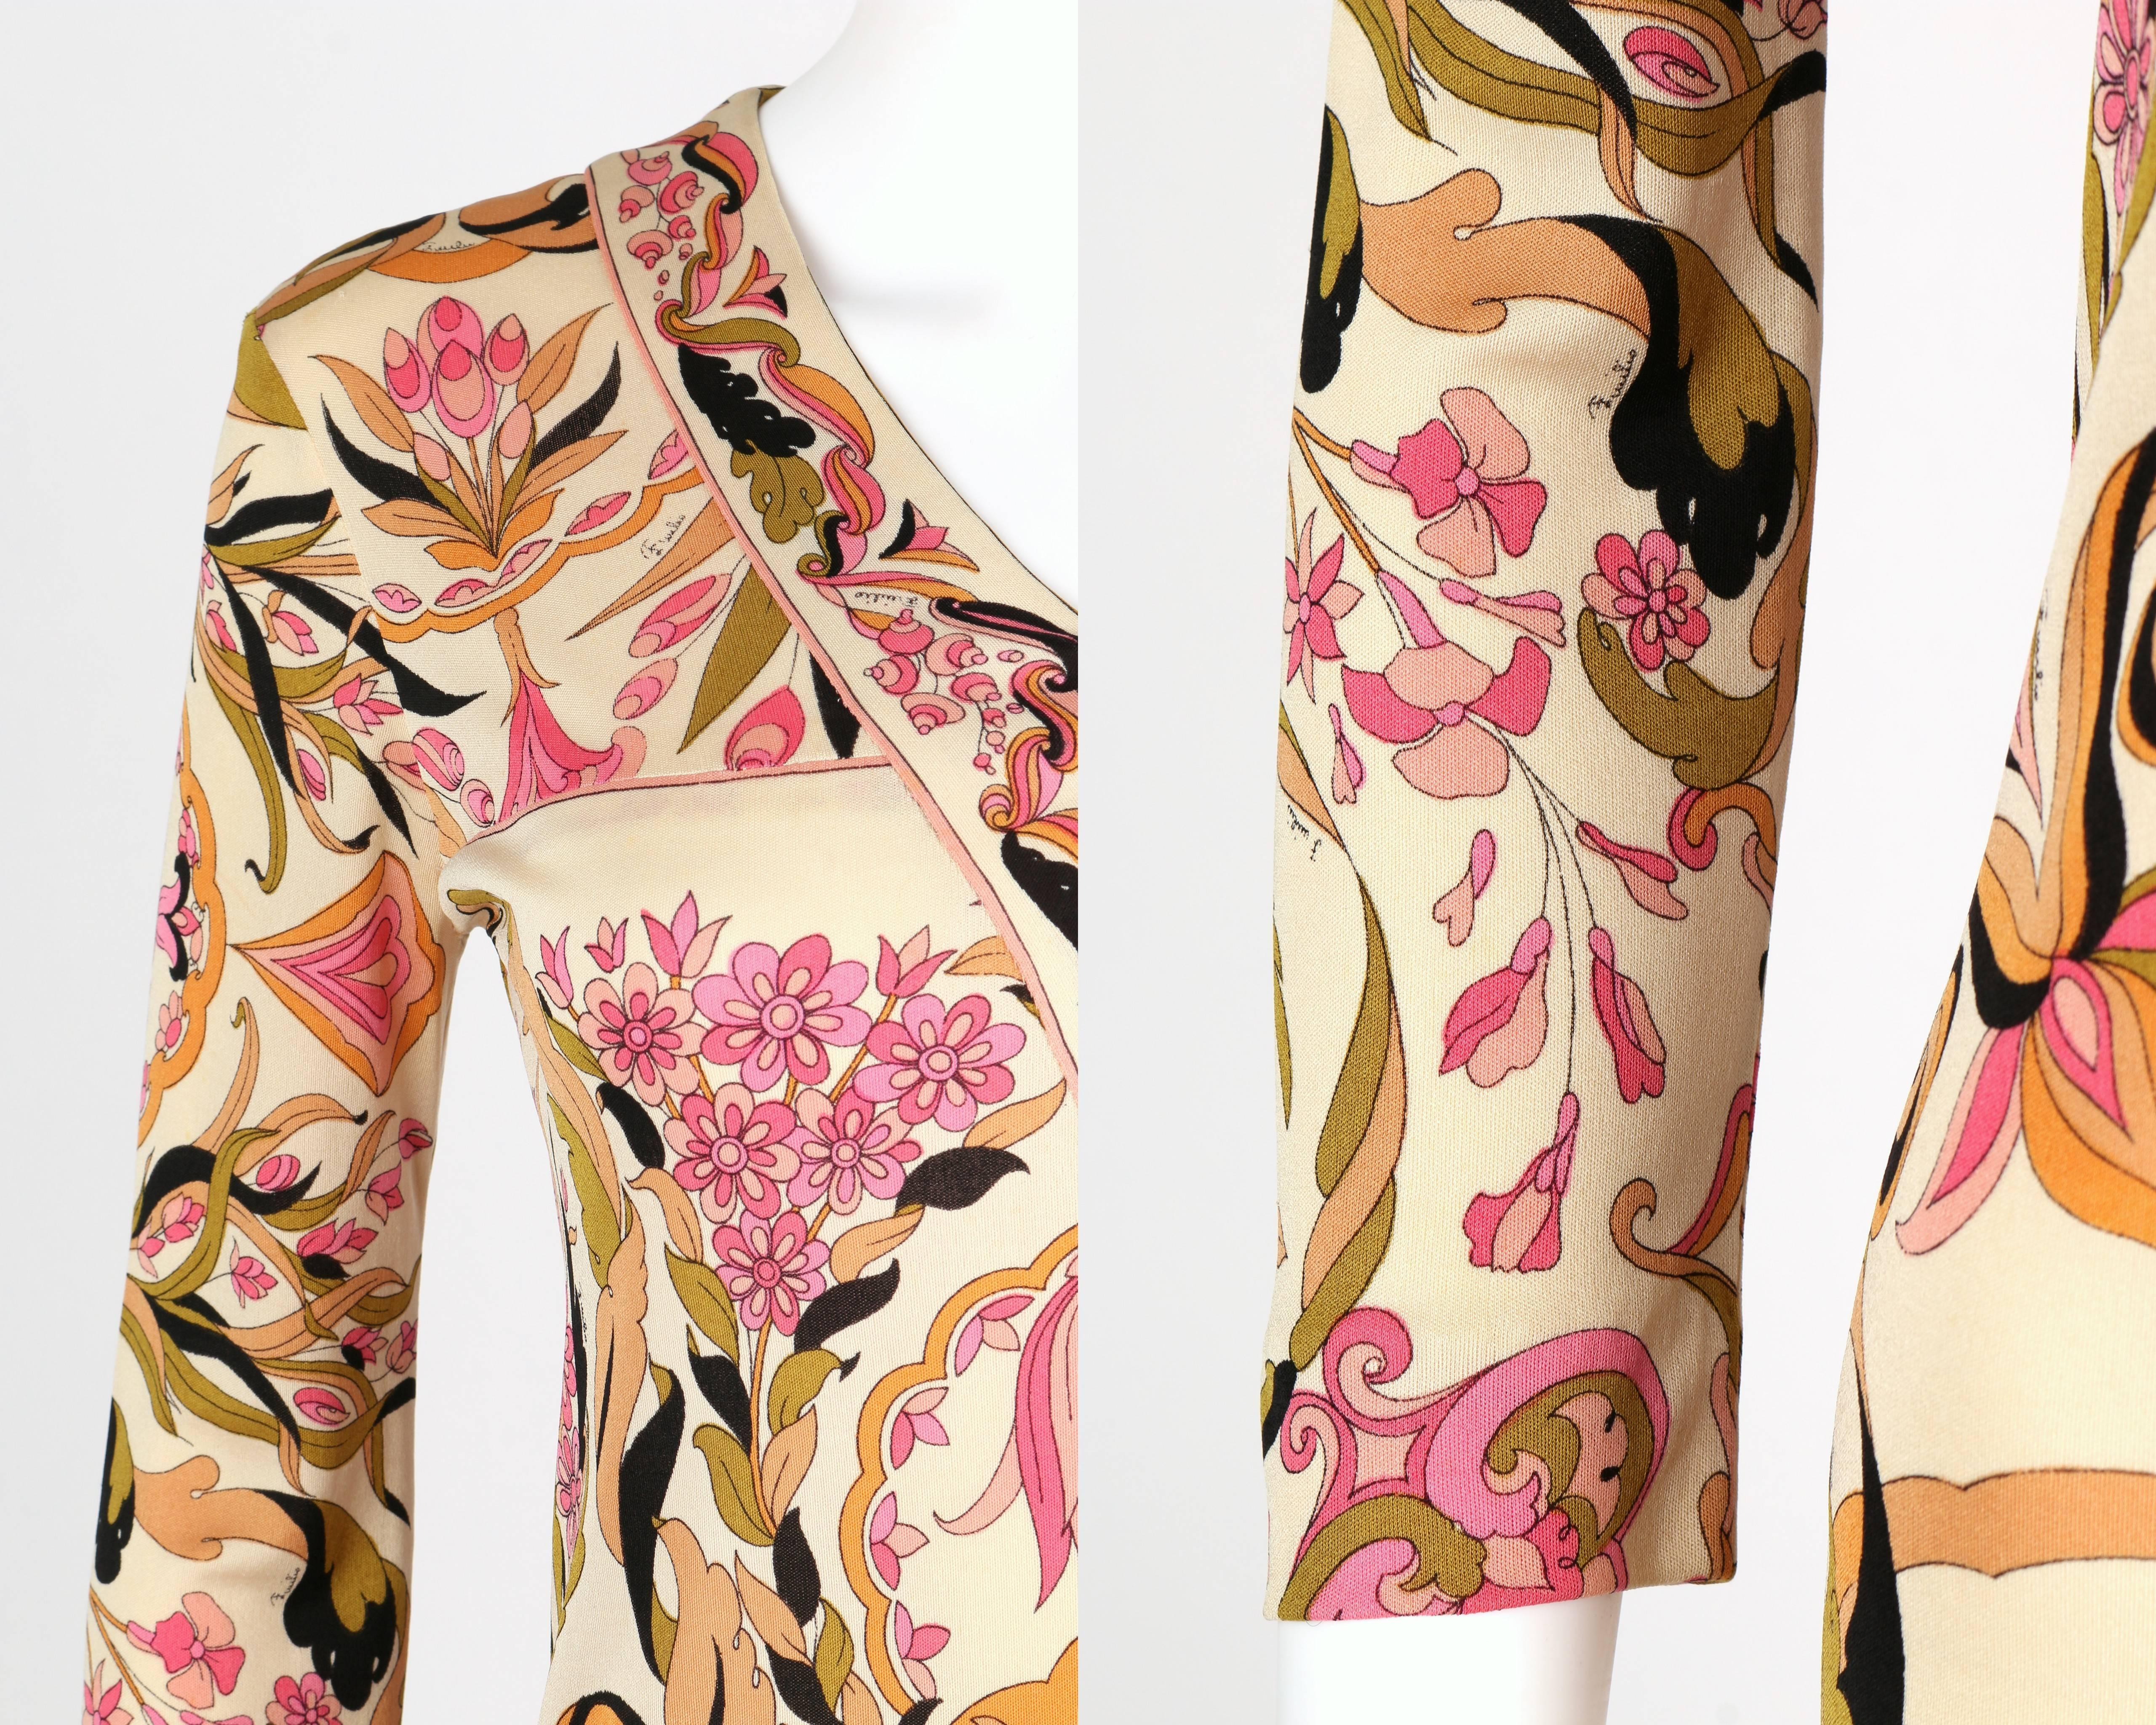 EMILIO PUCCI 1960's Pink Multicolor Kaleidoscope Floral Print Silk Sheath Dress In Good Condition For Sale In Thiensville, WI